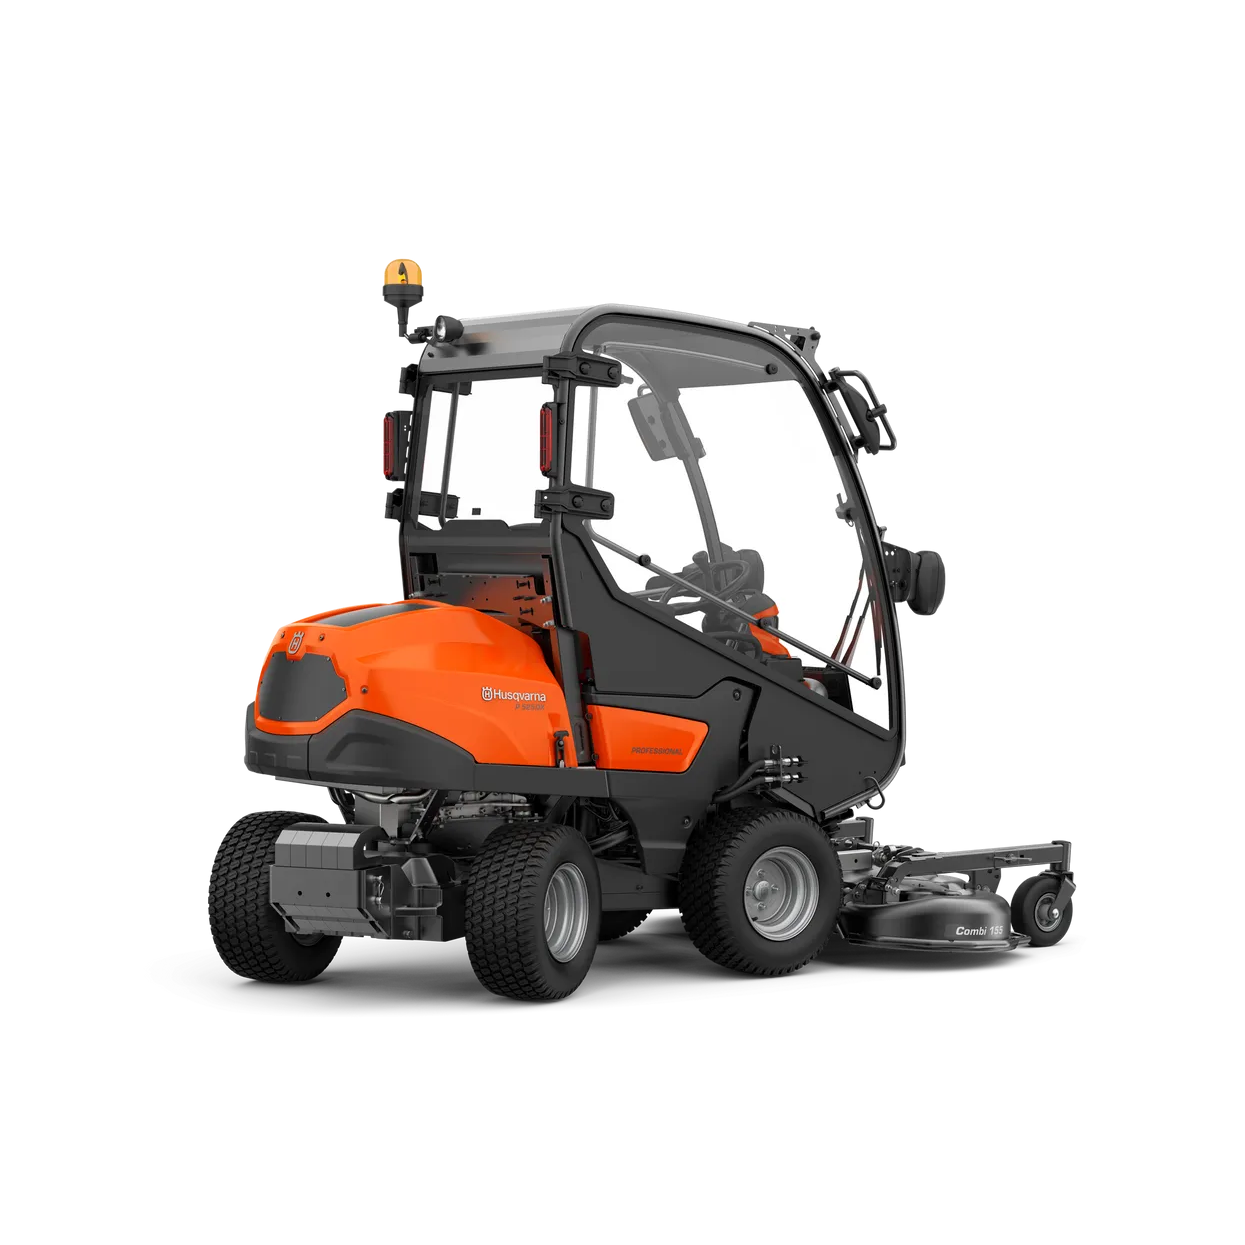 Husqvarna P 525DX Commercial Front Mower with Cabin